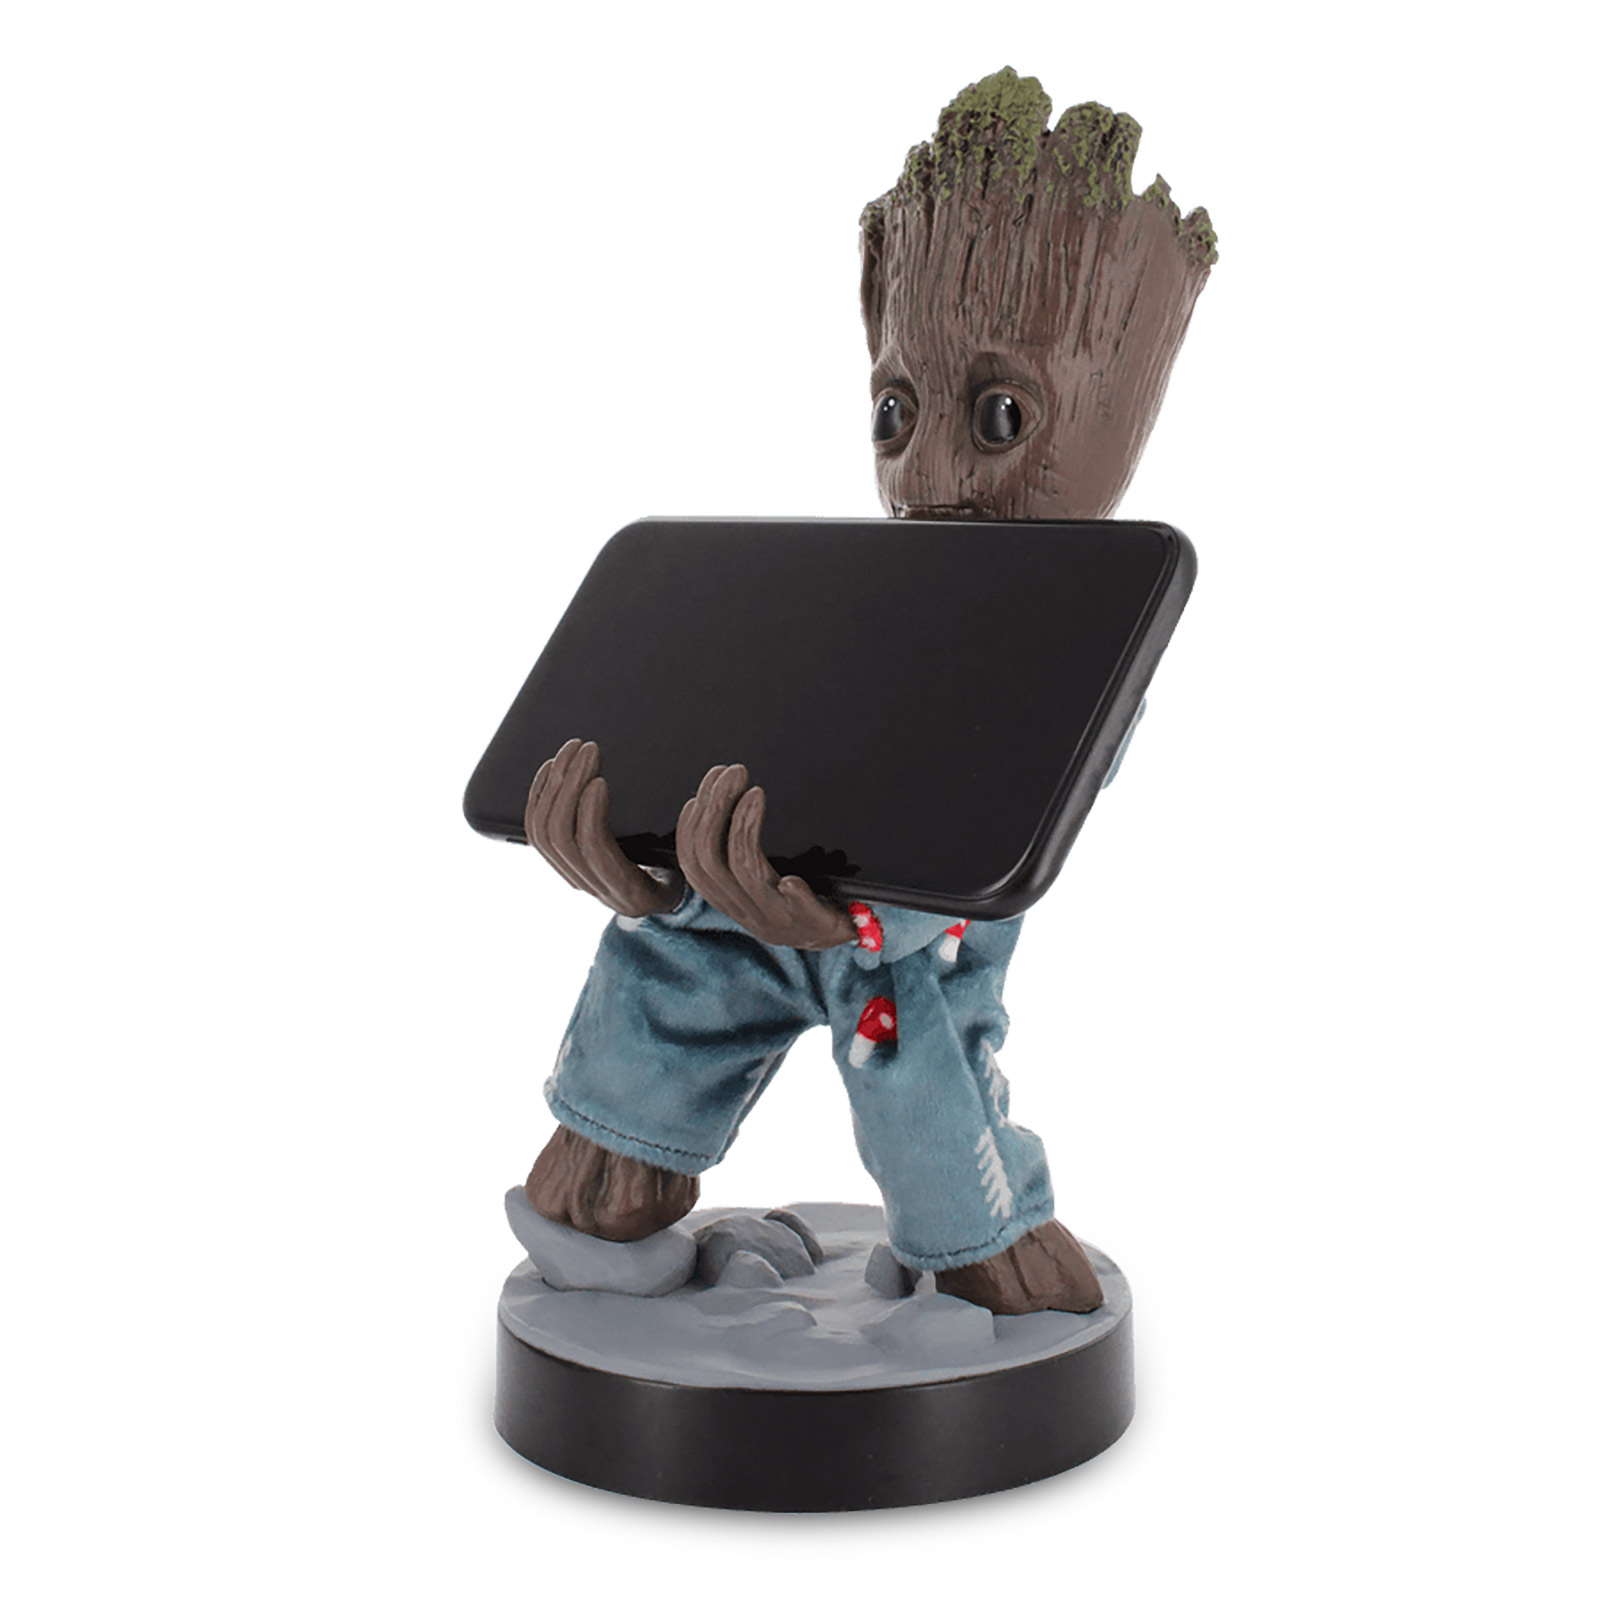 Guardians of the Galaxy - Pyjama Groot Cable Guy Figuur